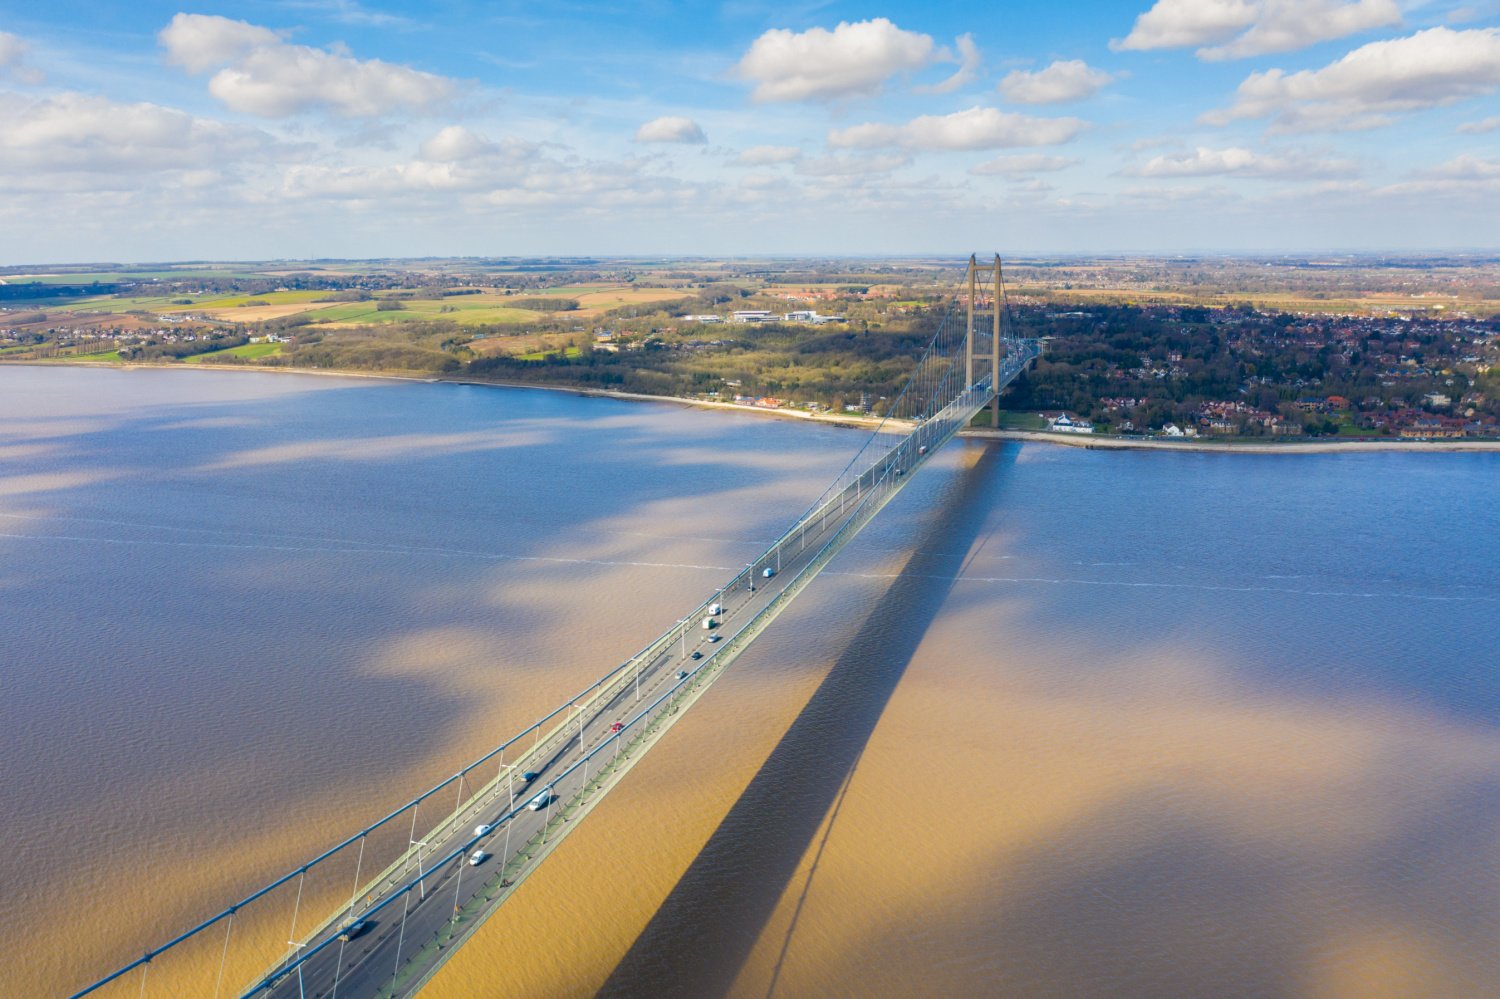 Image name hull humber bridge east yorkshire the 16 image from the post North Ferriby in Yorkshire.com.